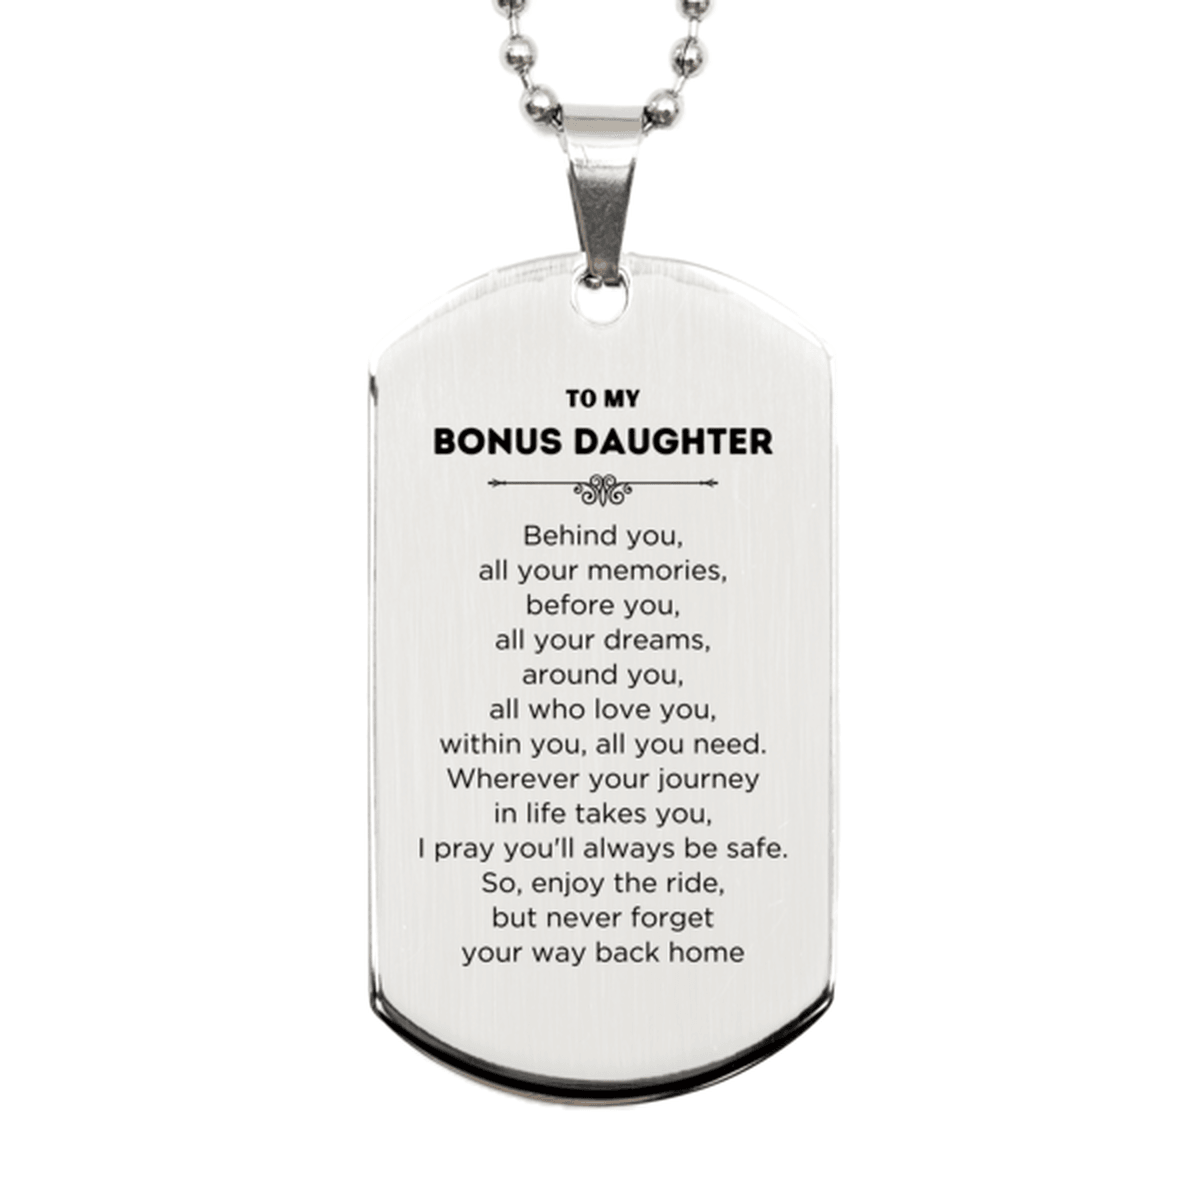 Bonus Daughter Silver Dog Tag Necklace Birthday Christmas Unique Gifts Behind you, all your memories, before you, all your dreams - Mallard Moon Gift Shop